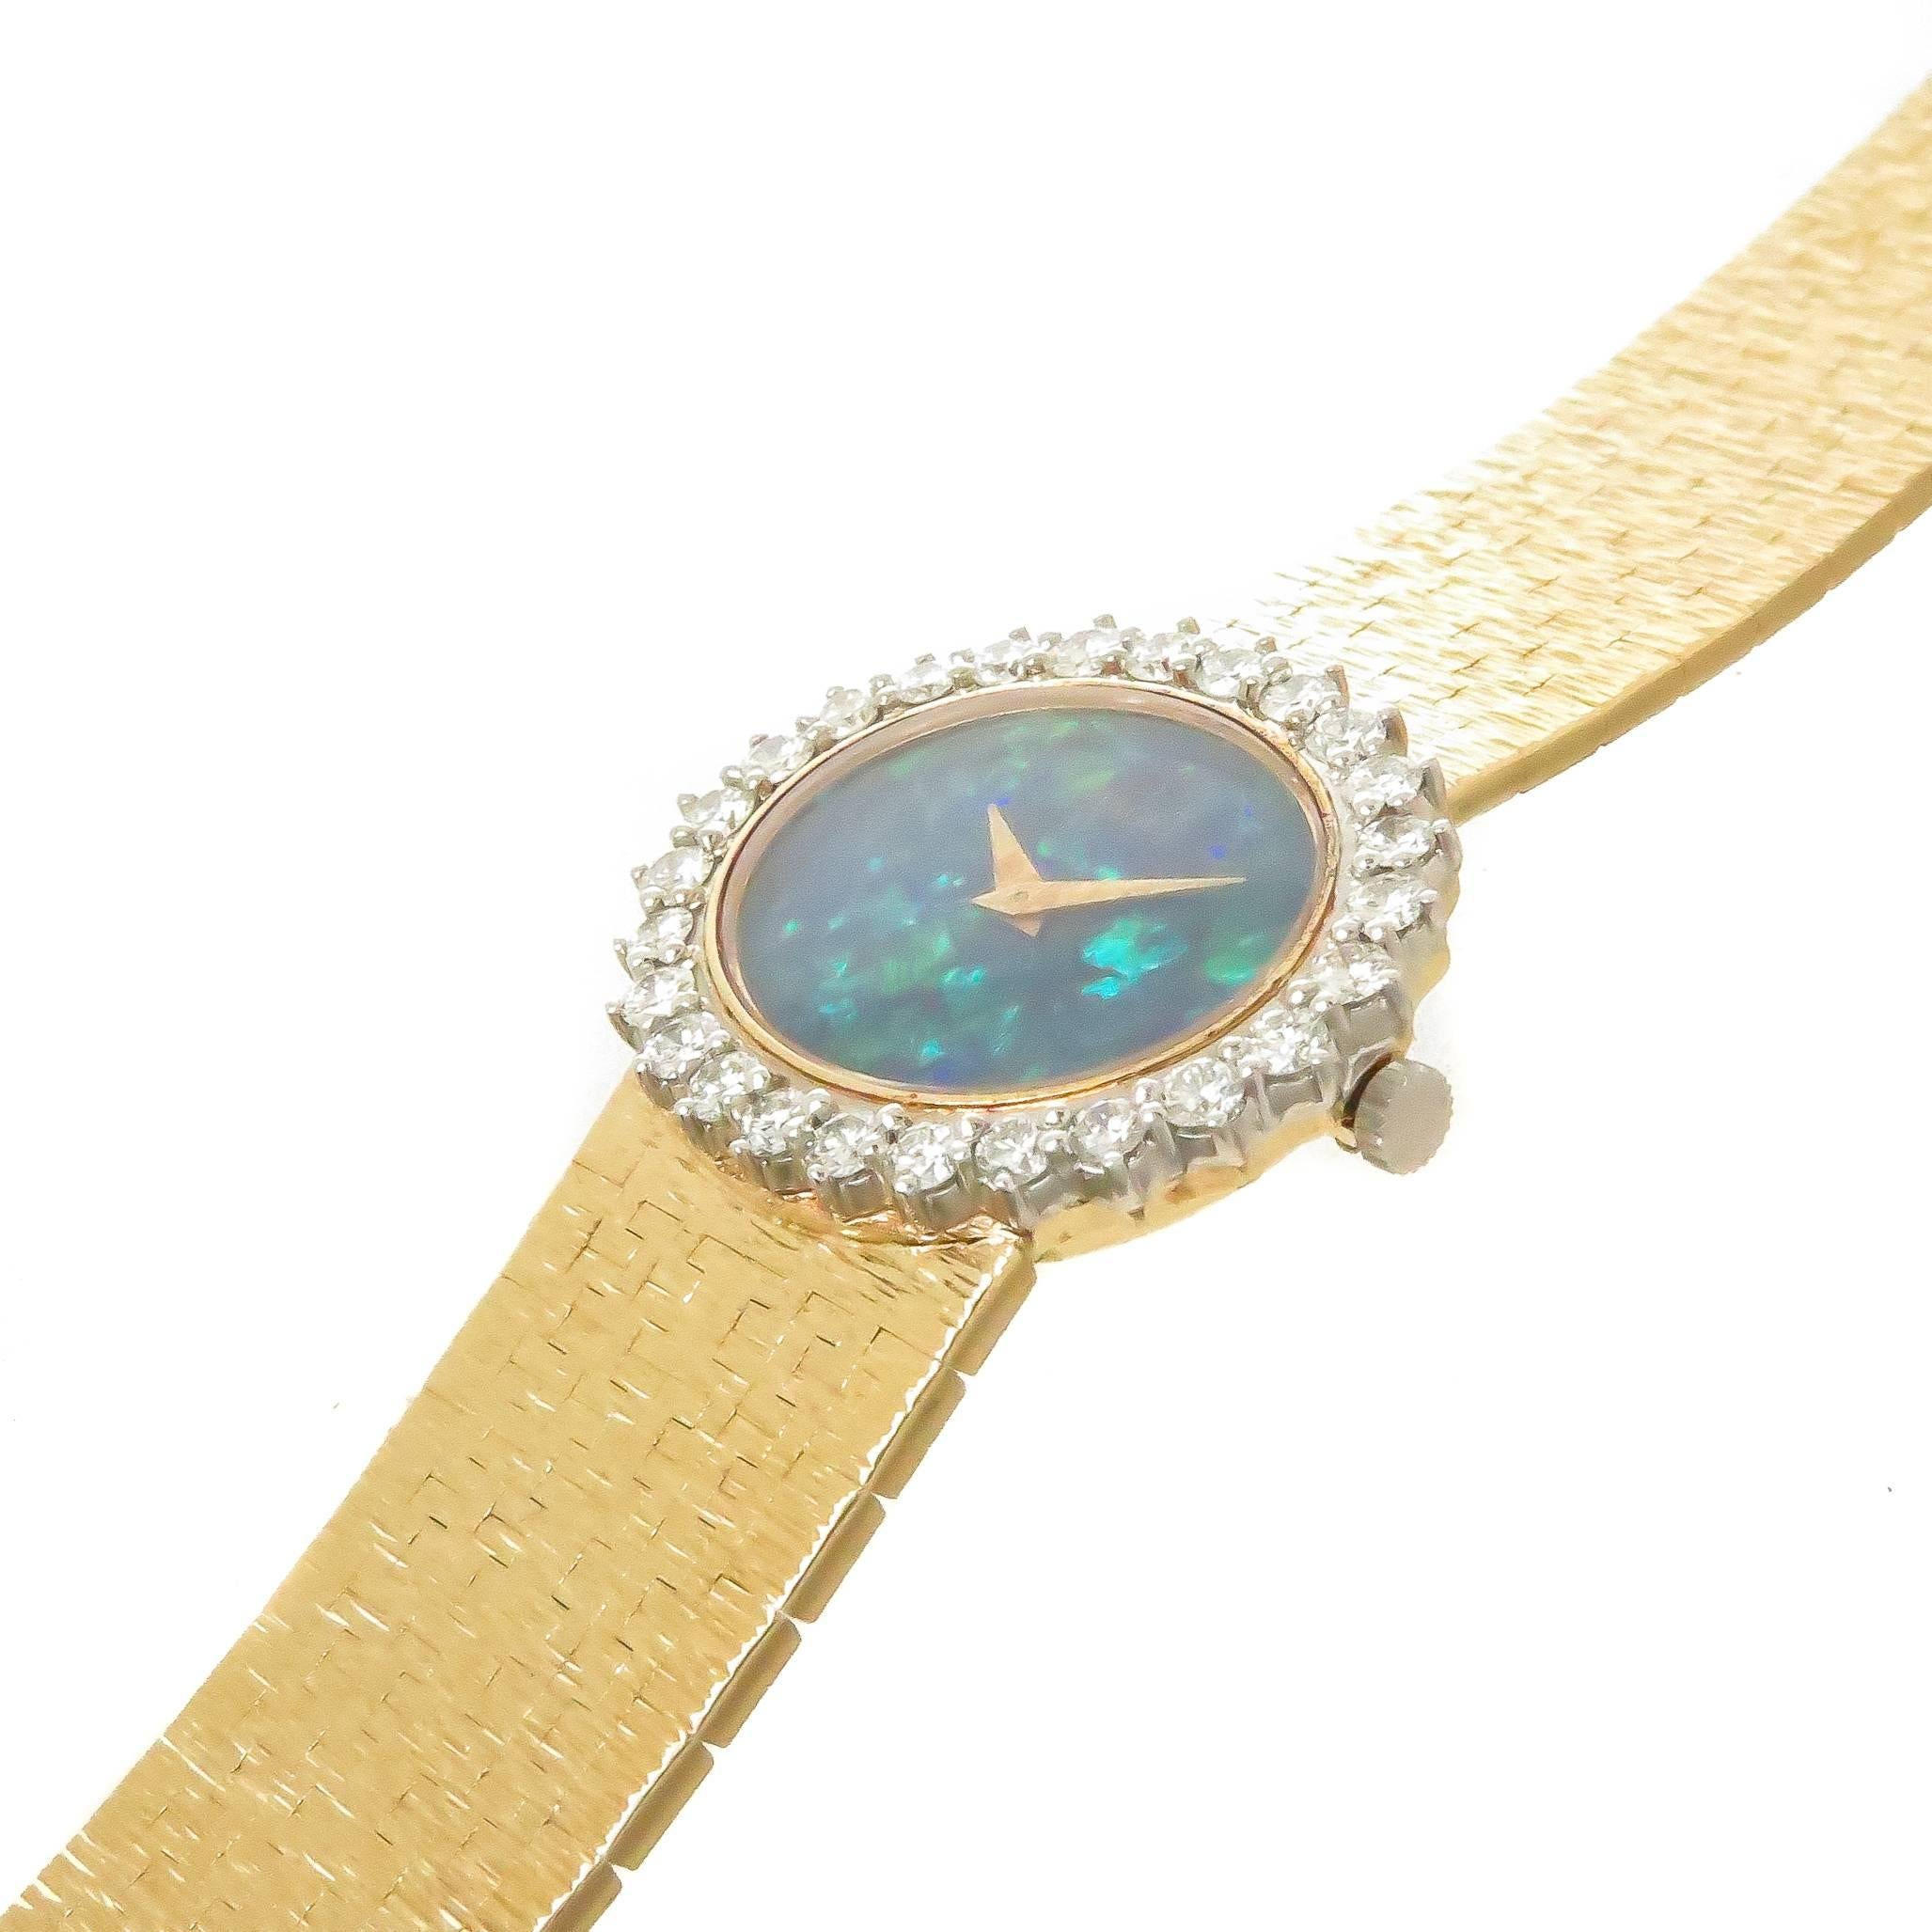 Circa 1980 Piaget Ladies Wrist Watch, 25 X 24 MM 18K Yellow Gold Oval case, Diamond set Bezel of 26 round Brilliant cuts totaling 1.50 Carats and Grading as G in color and VS in clarity. Very Fine Black opal dial, 17 jewel Mechanical, Manual wind